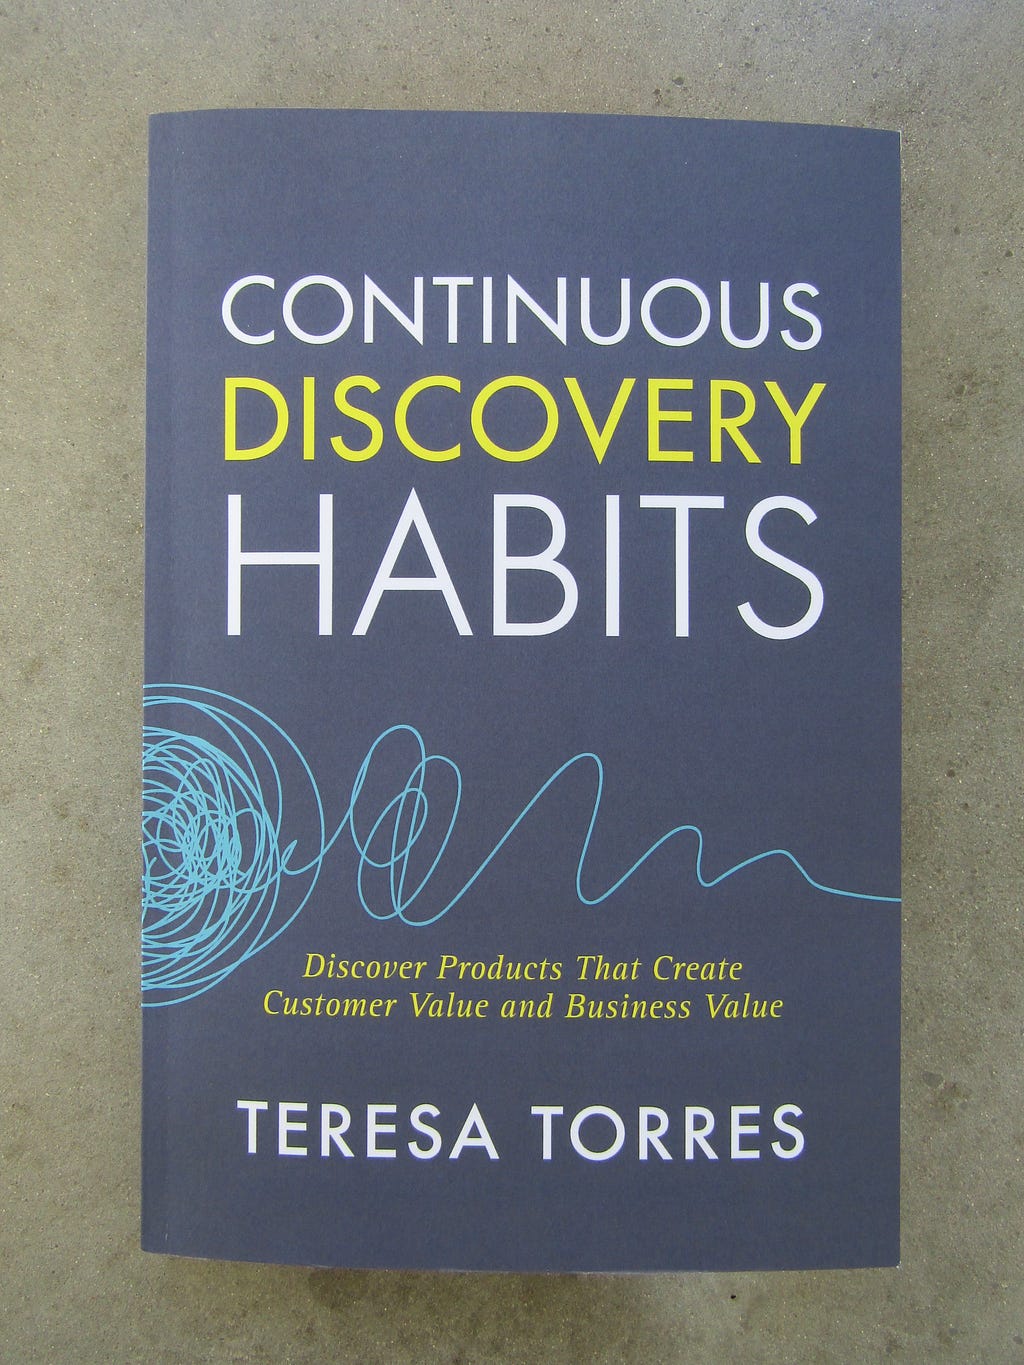 Continuous Discovery Habits by Teresa Torres